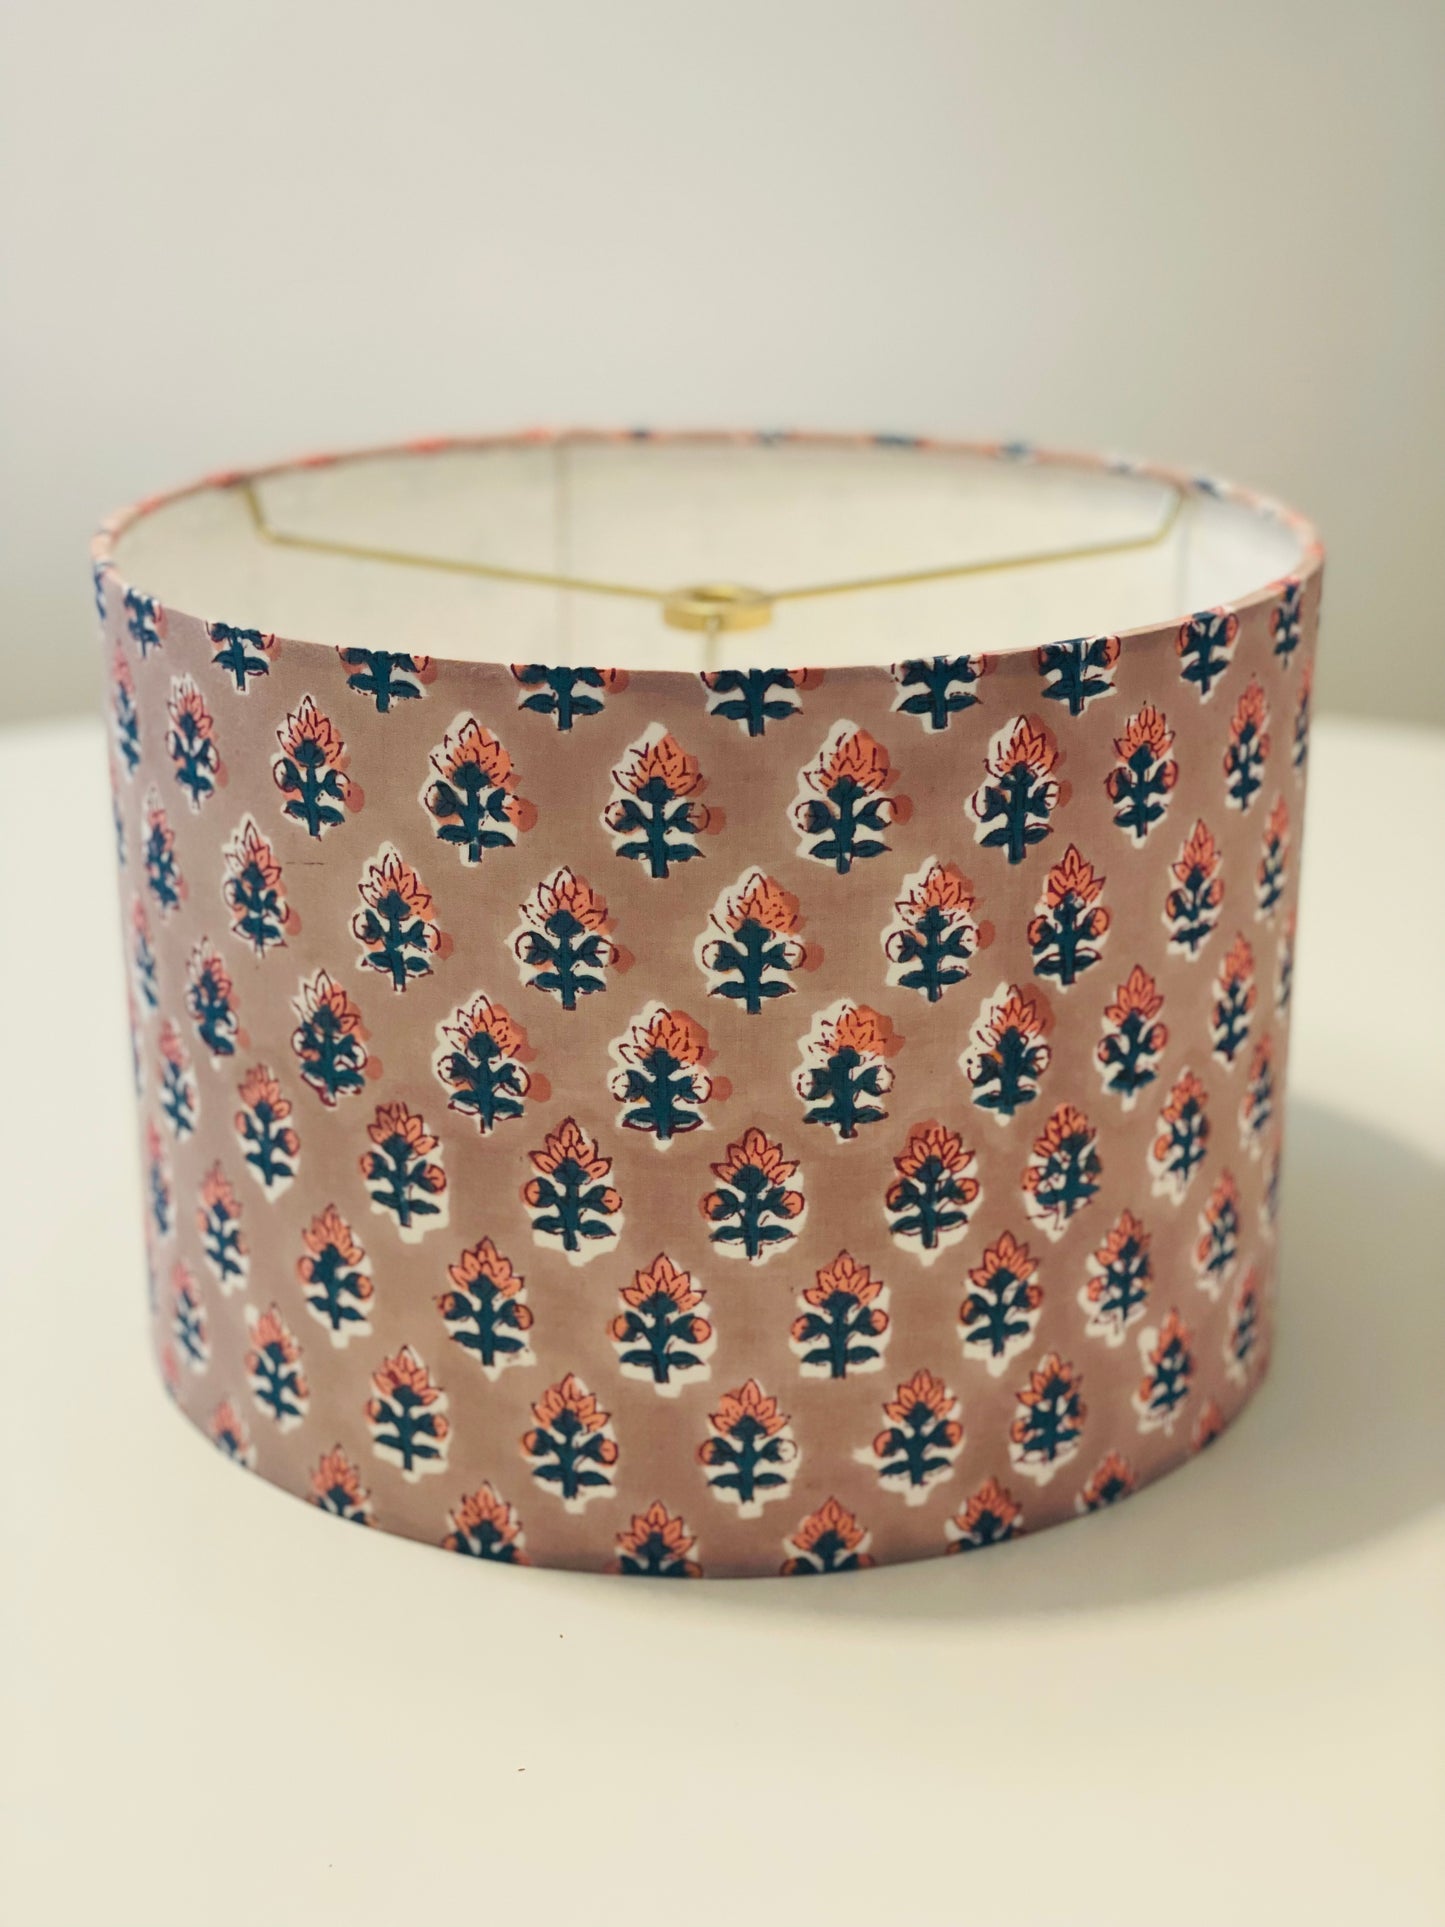 10 inch Drum Lampshade. Sanganeri Block Print from India. Salmon and Teal Floral on Khaki.